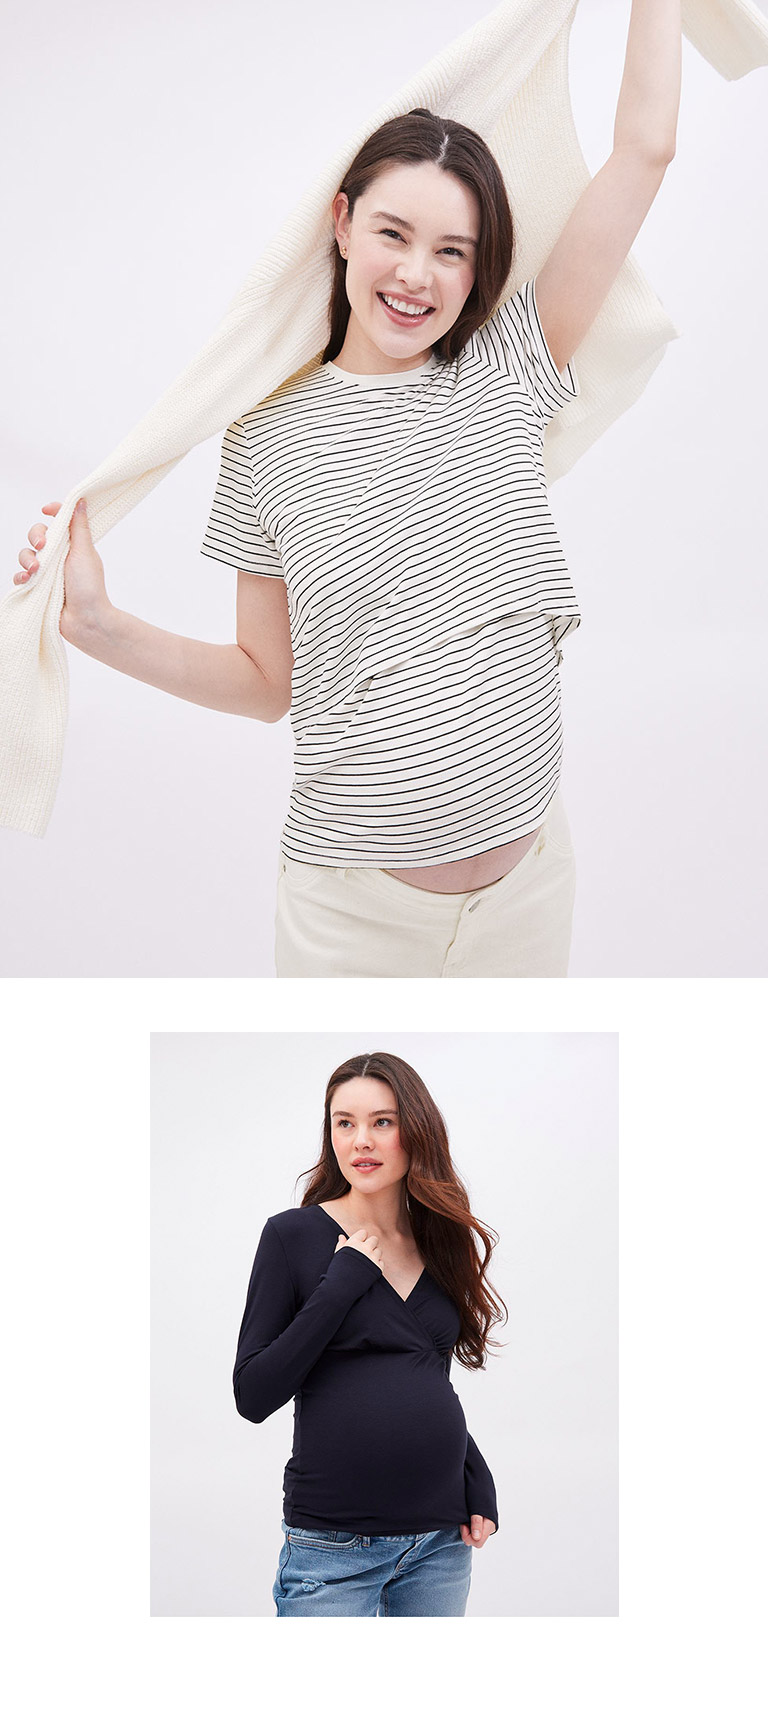 Building a Spring Maternity Wardrobe - Thyme Maternity, Shop Online